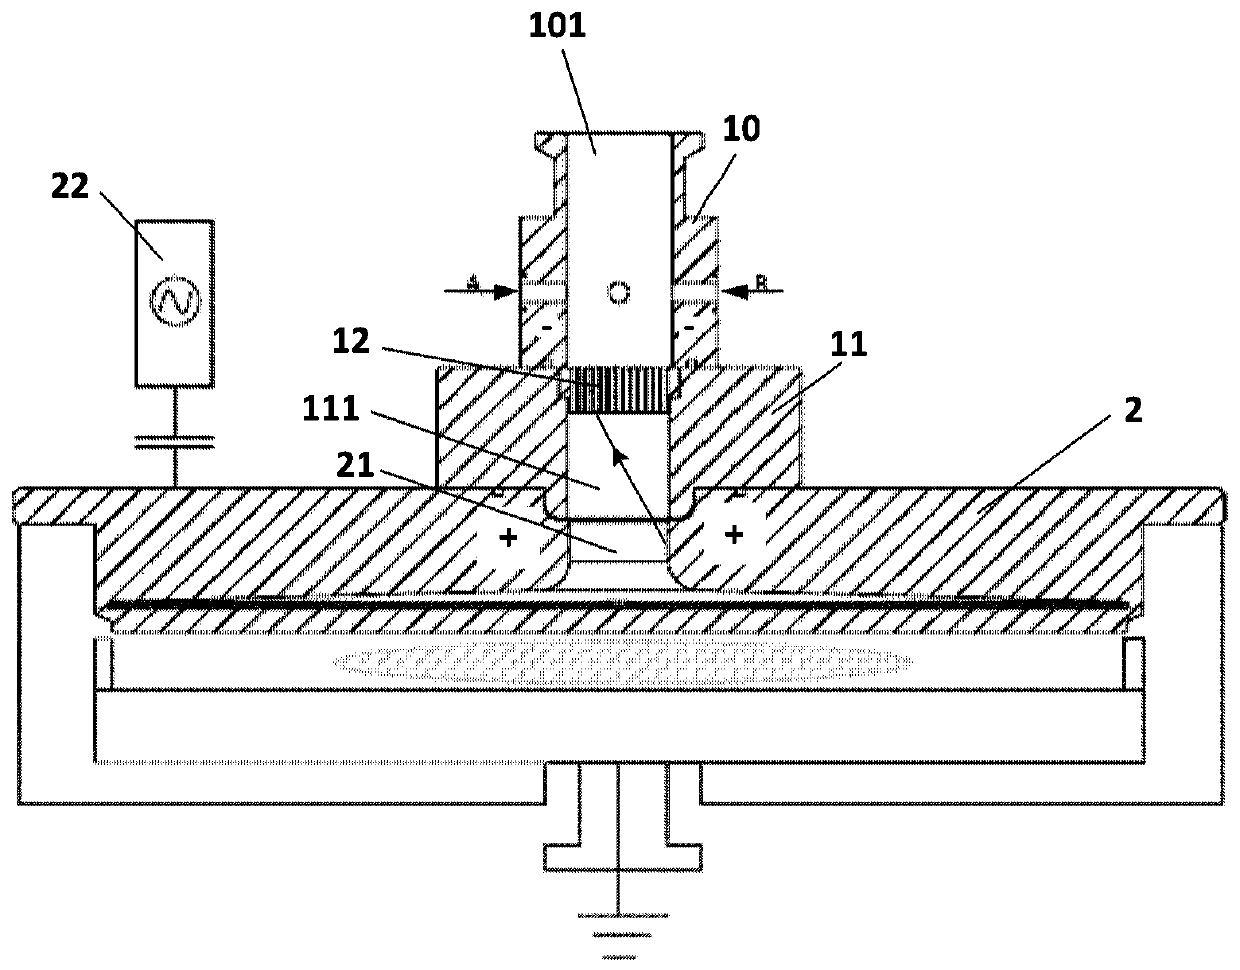 Upper electrode assembly, reaction chamber and atomic layer deposition equipment